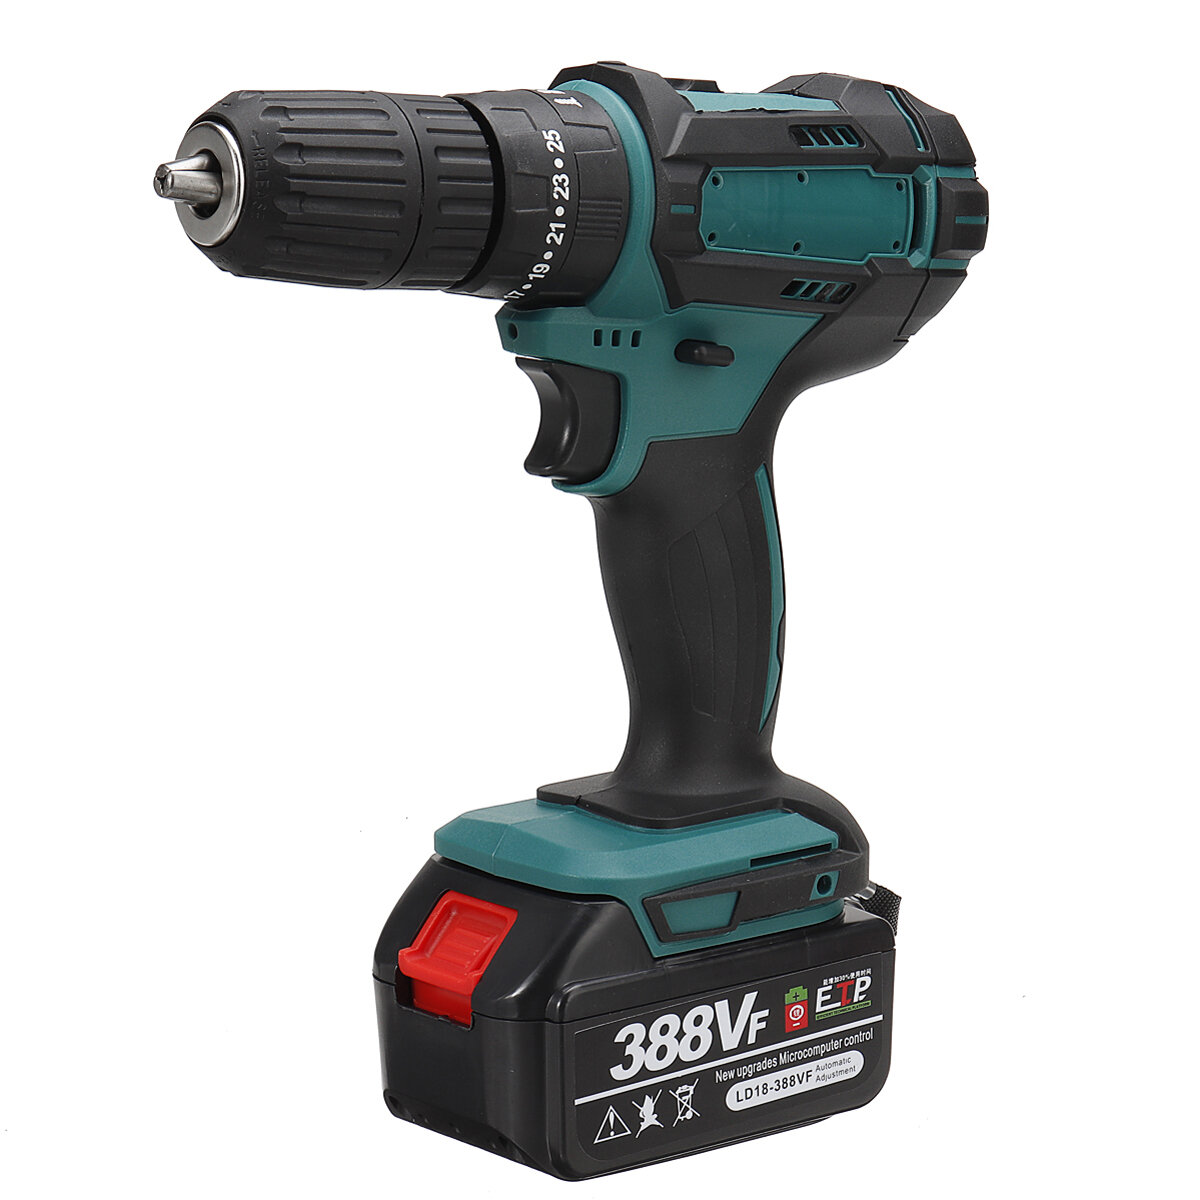 388VF 1500W Electric Cordless Impact Drill LED Working Light Rechargeable Woodworking Maintenance To